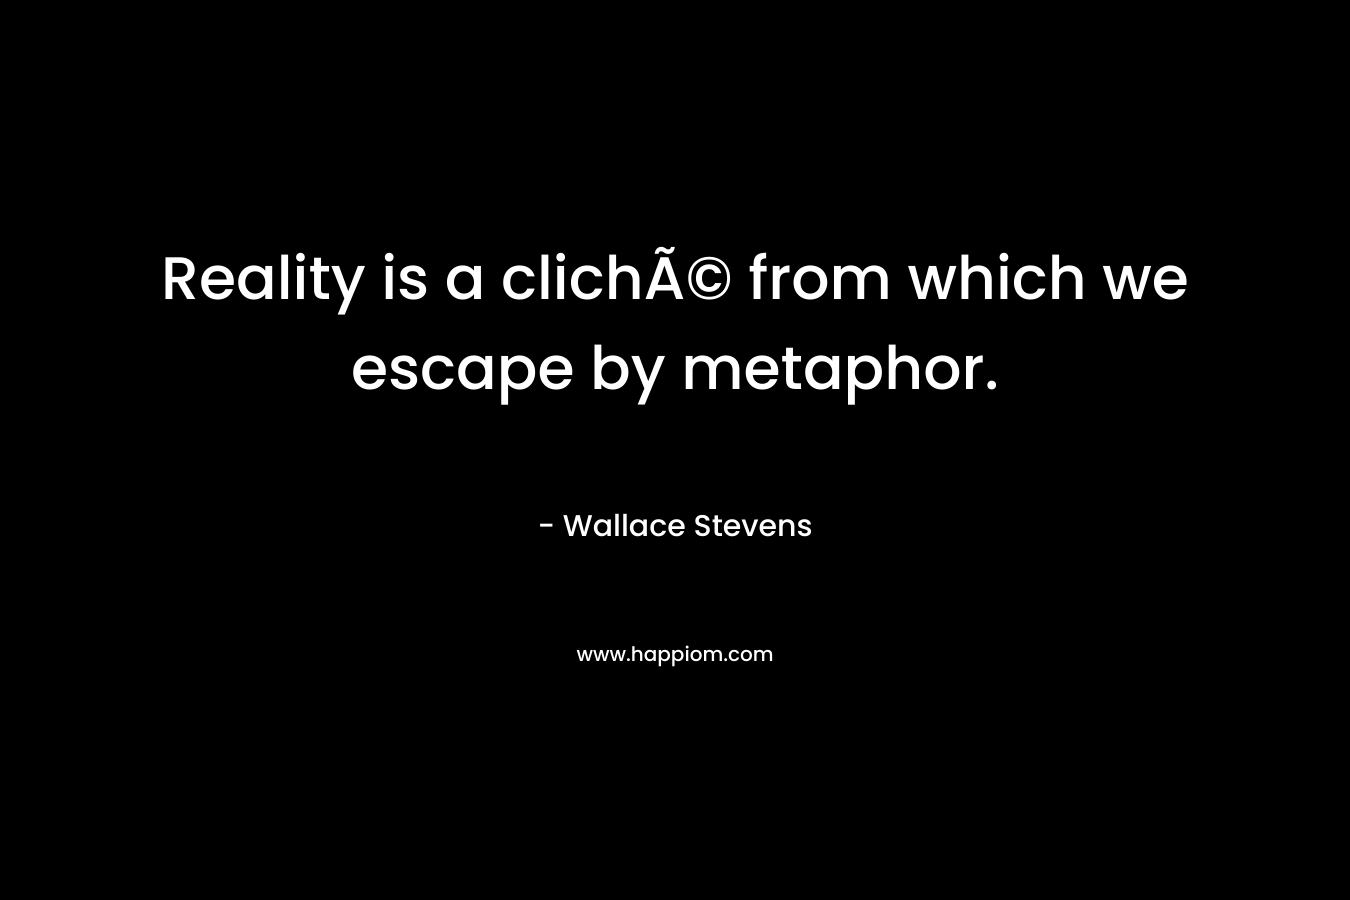 Reality is a clichÃ© from which we escape by metaphor. – Wallace Stevens